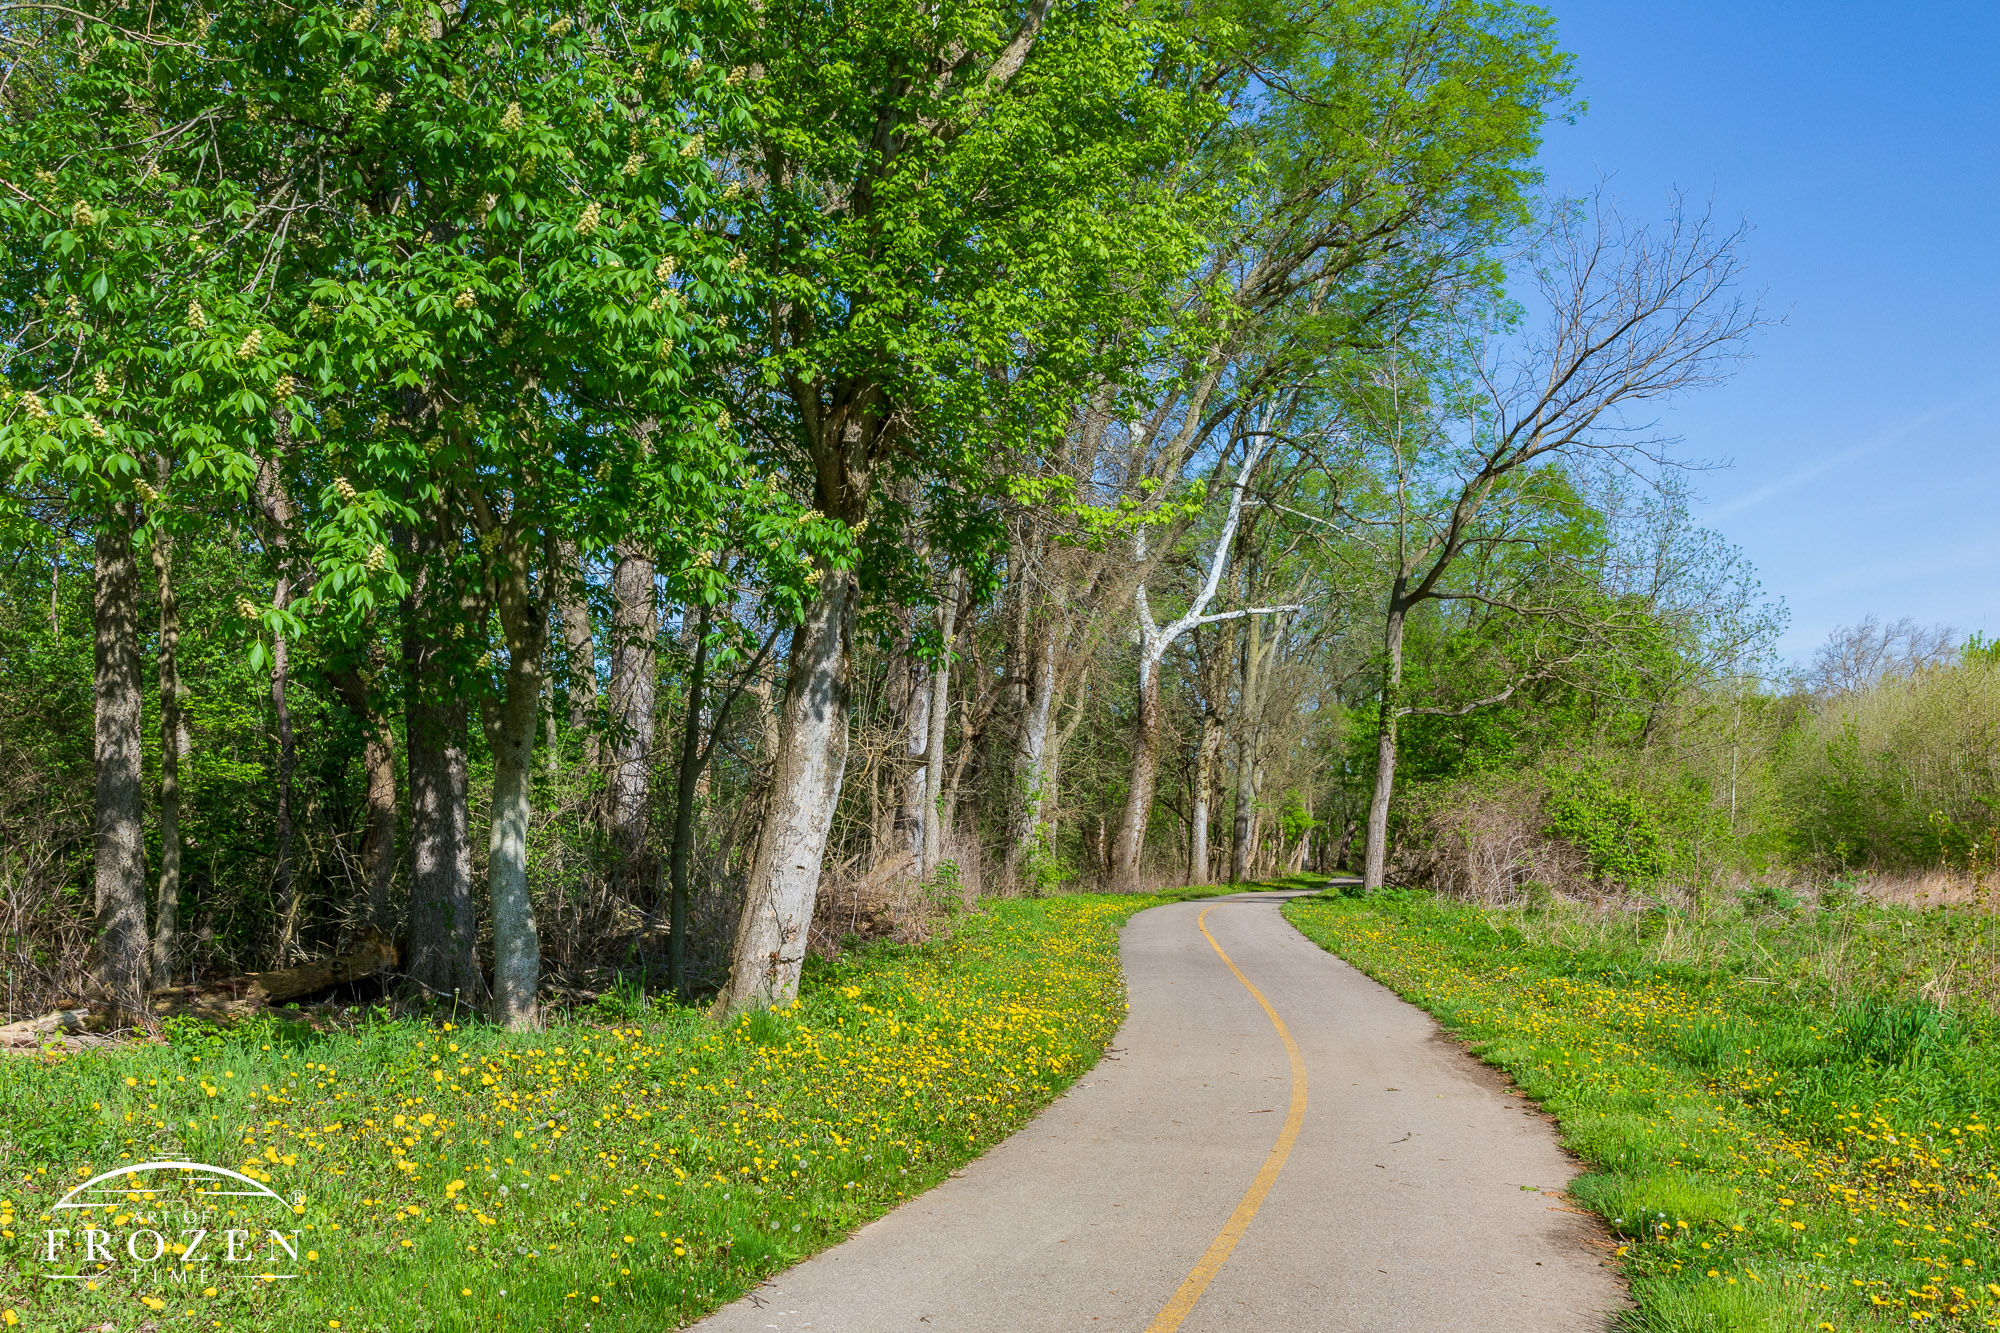 A series of s-turns on the Great Miami River Recreational Trail as it approaches the river on a bright, sunny spring day